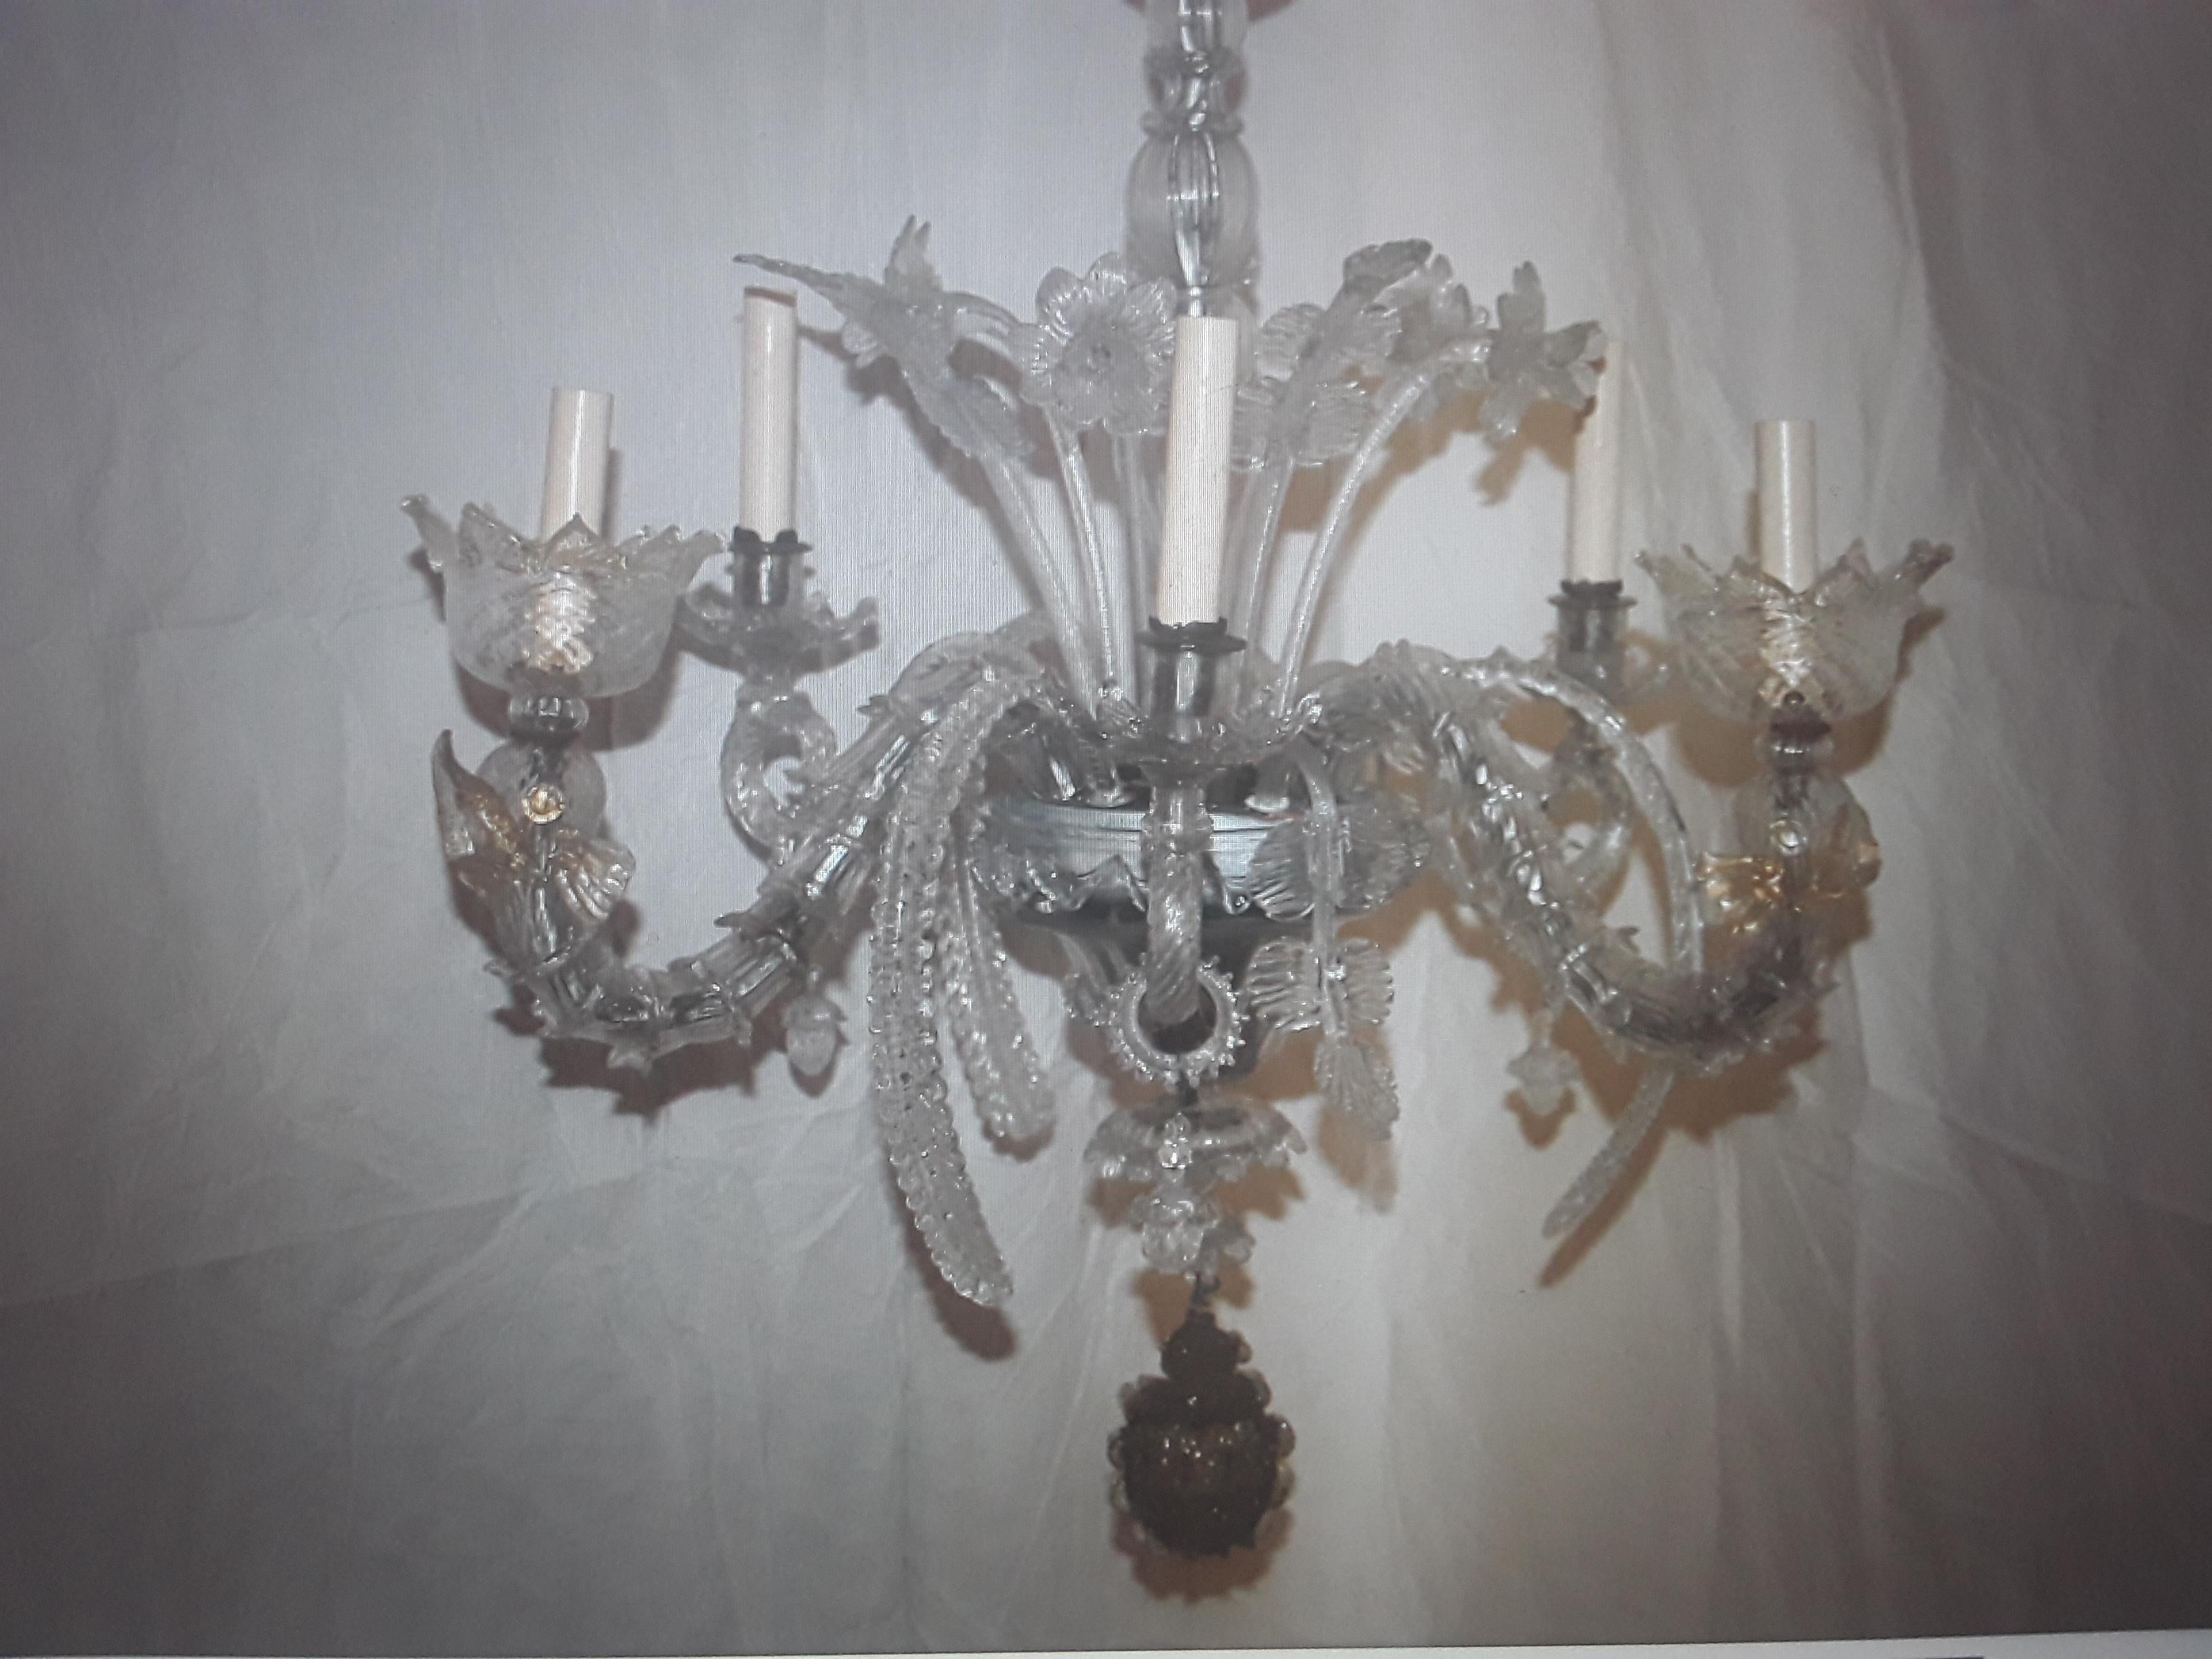 c1920 Italian Art Deco Murano Chandelier Featuring Art Glass Fish/ Dolphins For Sale 2